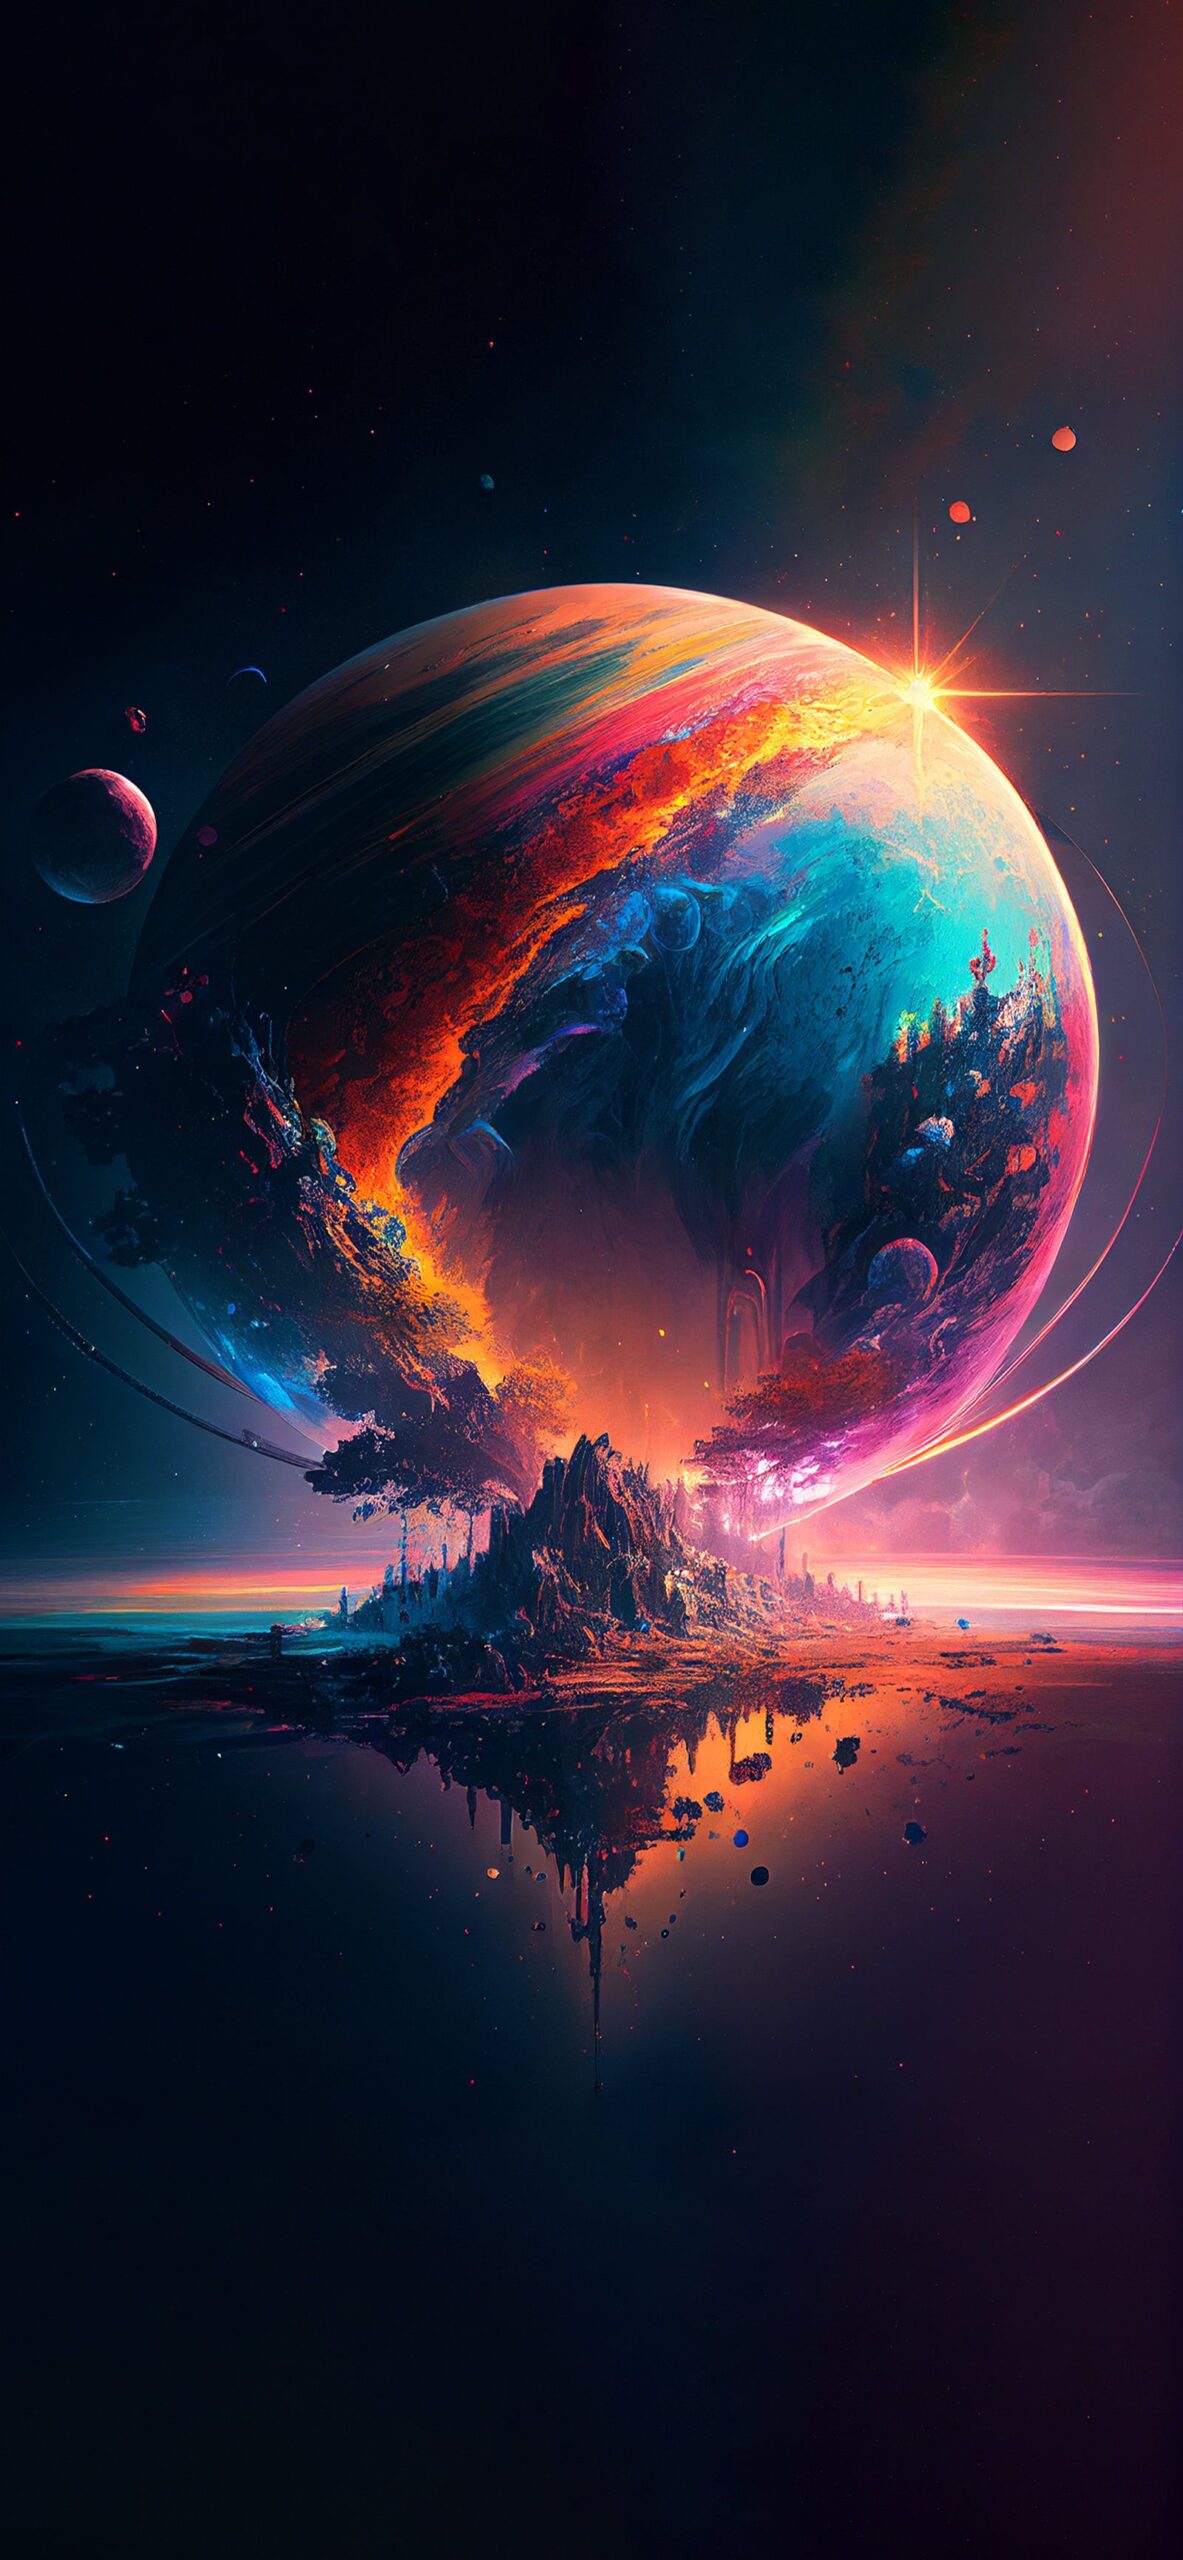 Amoled 4k wallpaper space Colorful and Astonishing planet and mountain scaled| Amoled 4k wallpaper space Colorful and Astonishing planet and mountain reflecting on lake - wallpapers 4K - Wallpaper